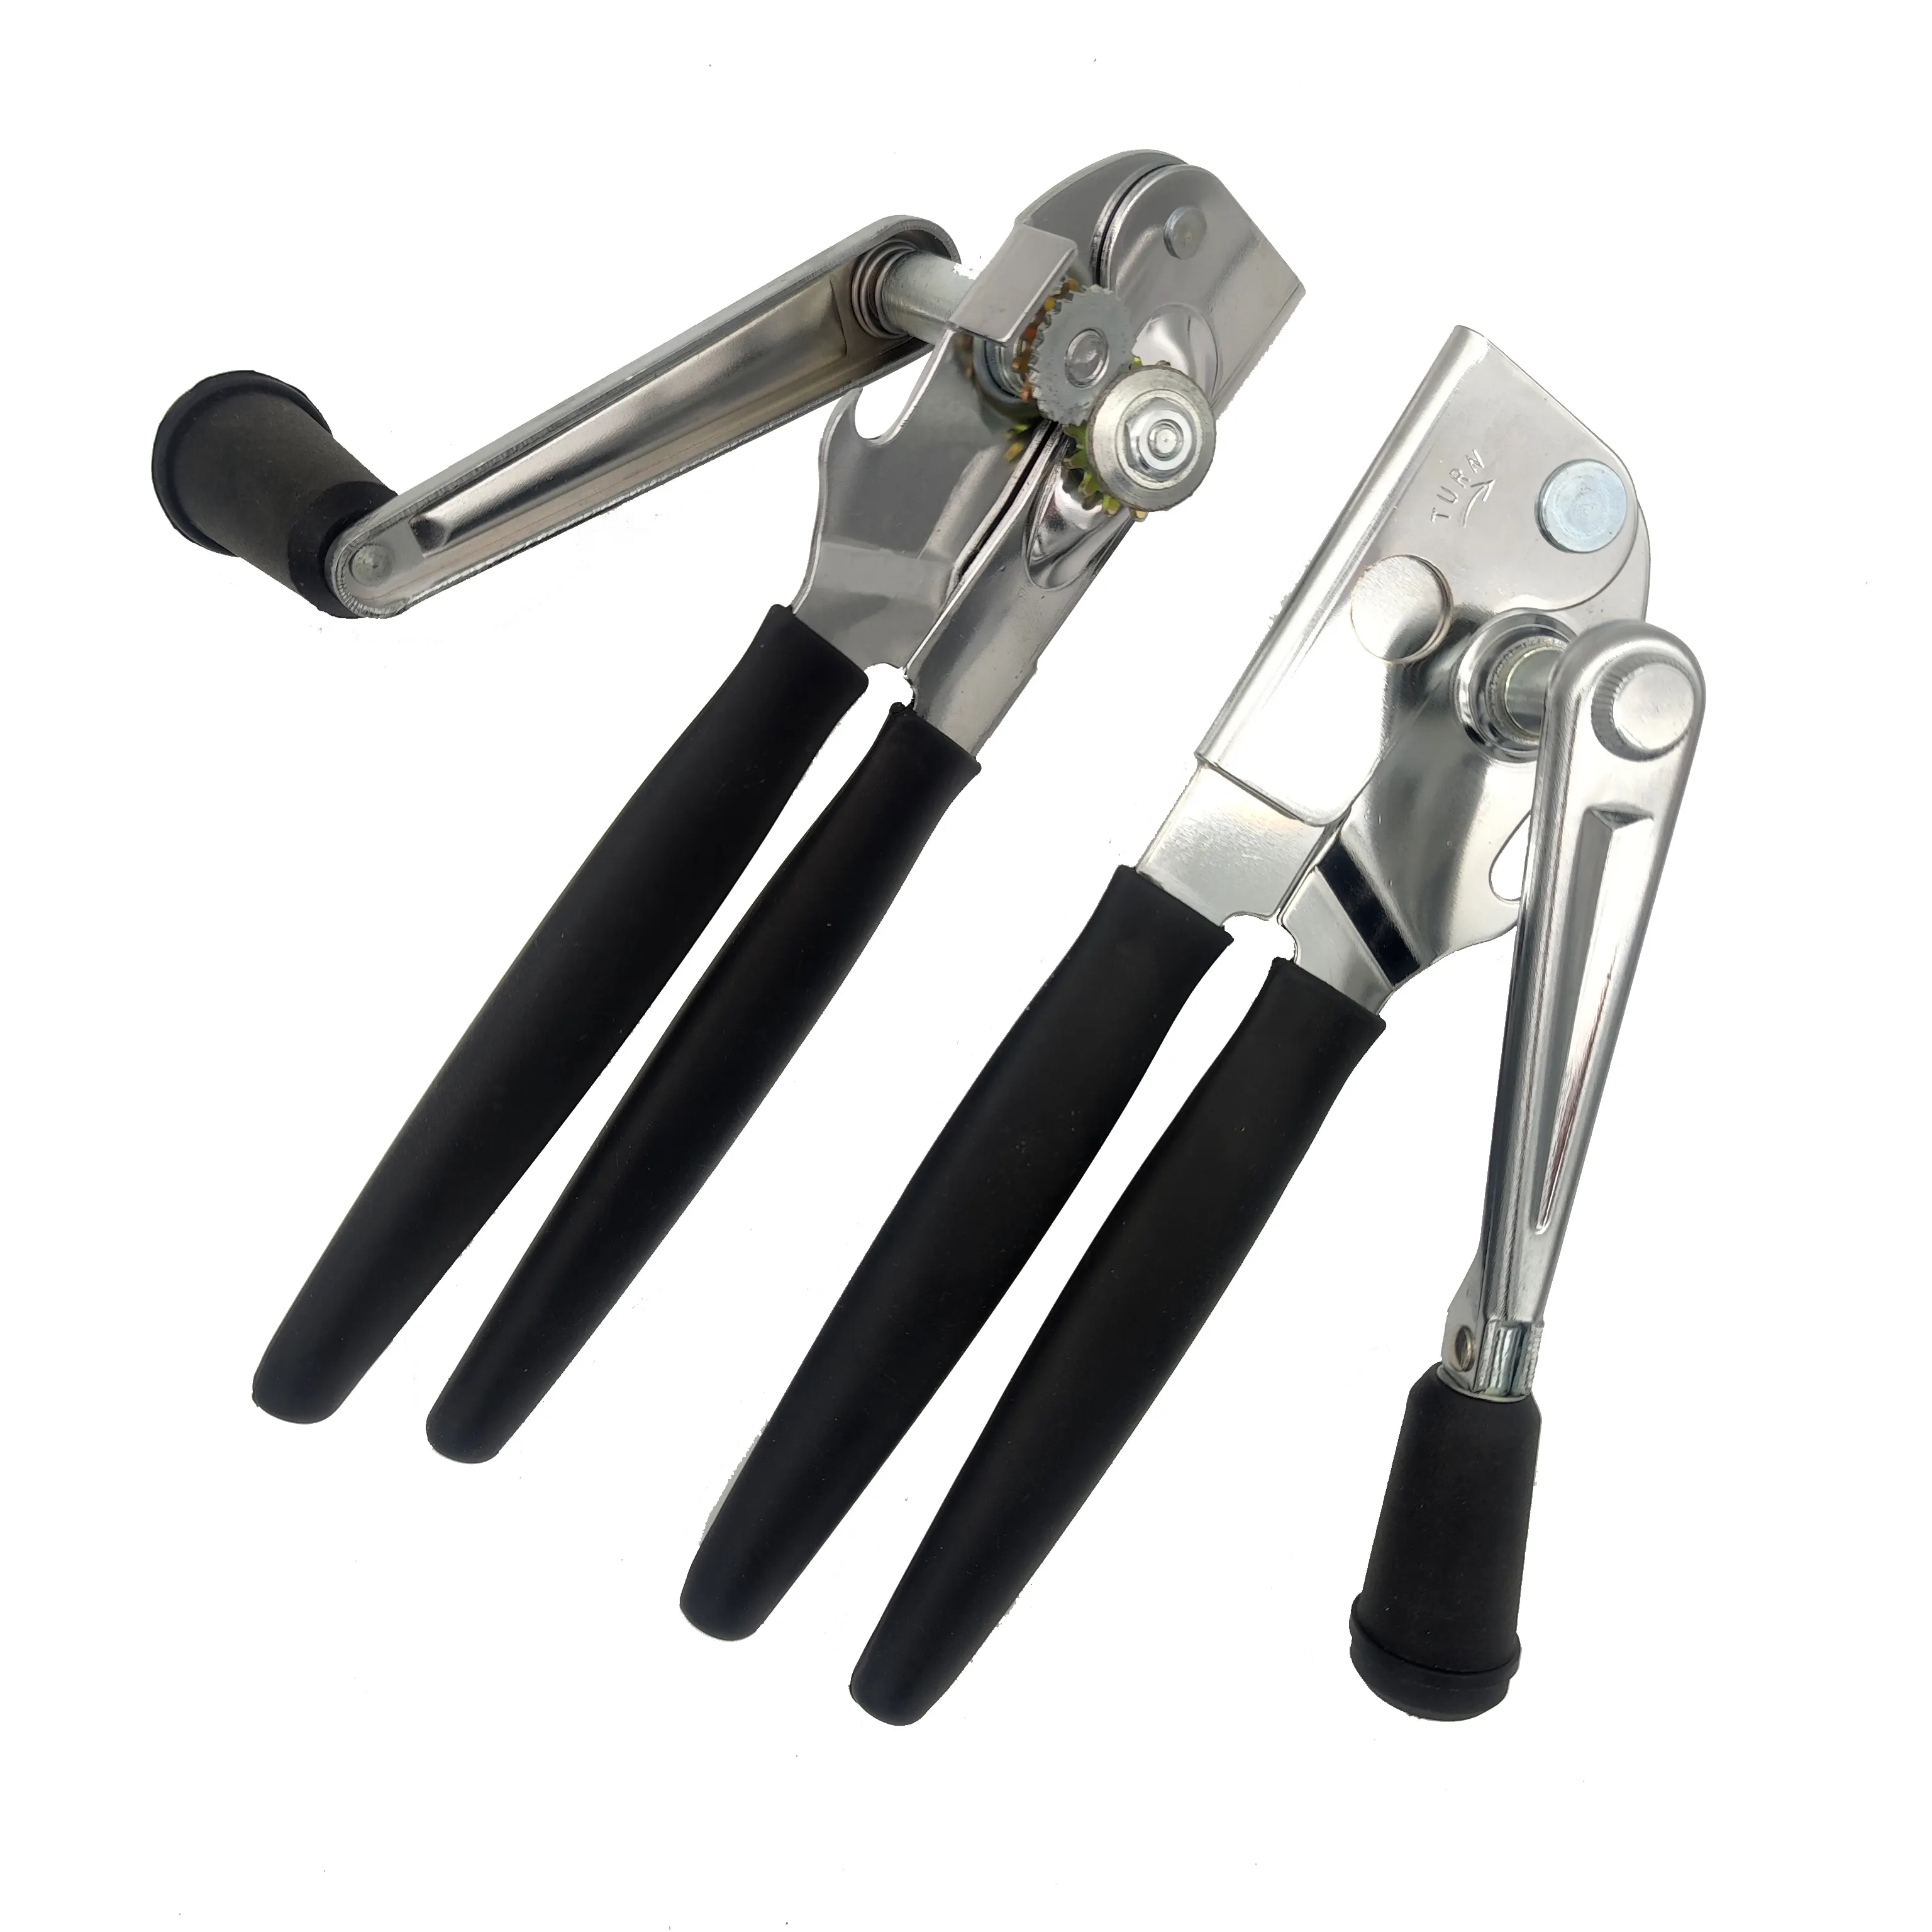 HM4508 Factory directly High Quality stainless steel Heavy Duty Easy Crank Can Opener With Folding Handle Ergonomic